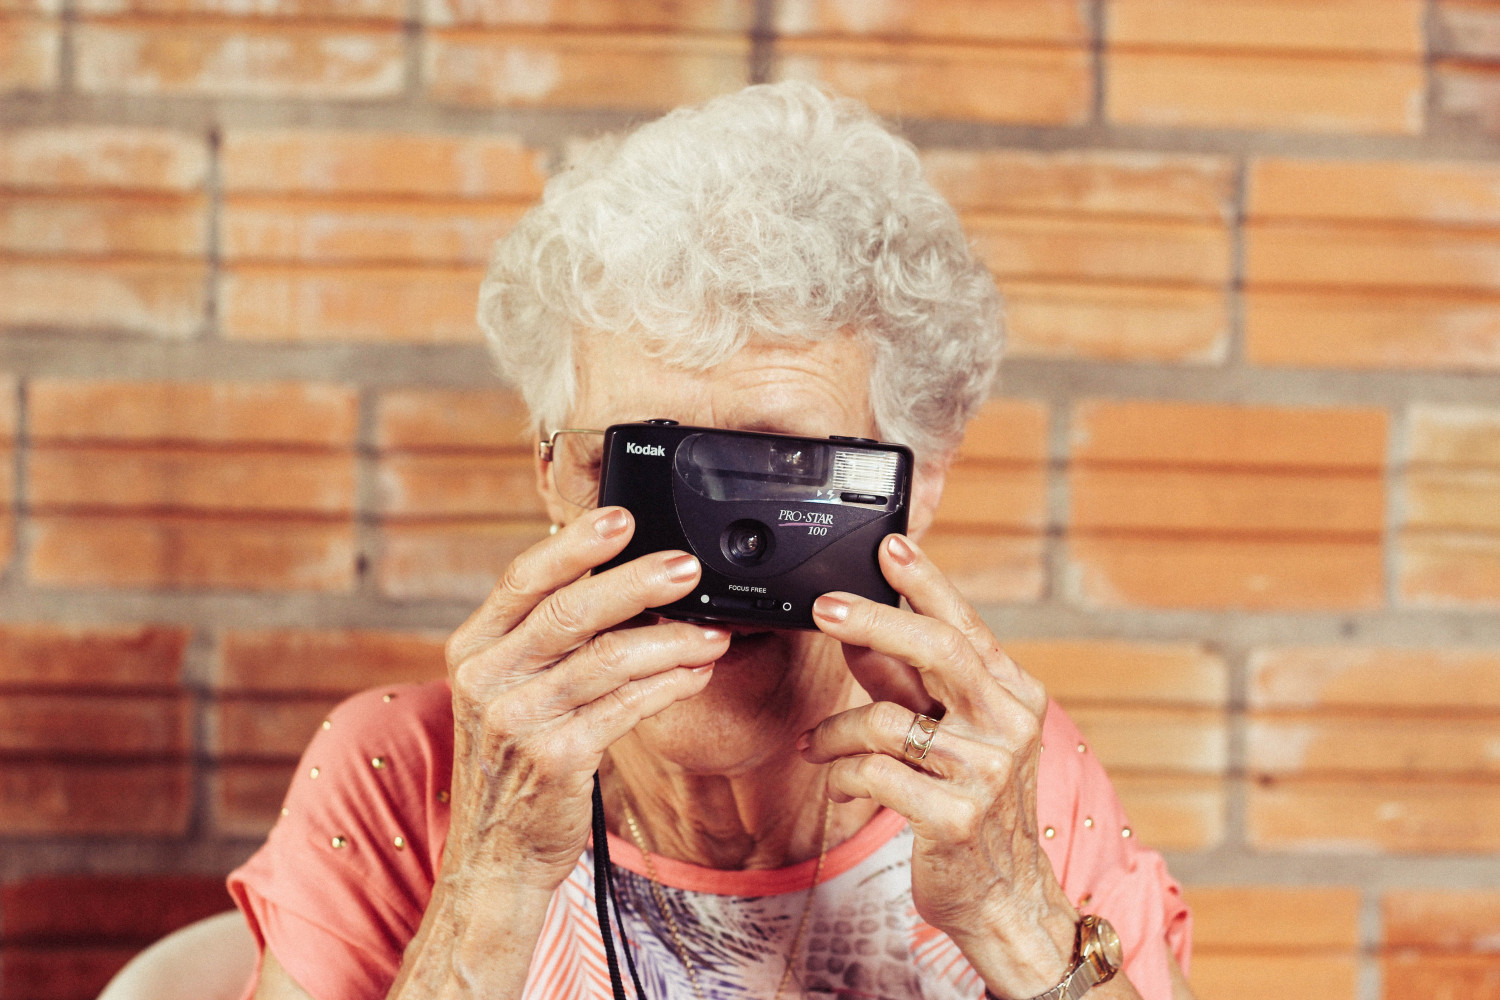 Image of an elderly woman holding up a camera to her face